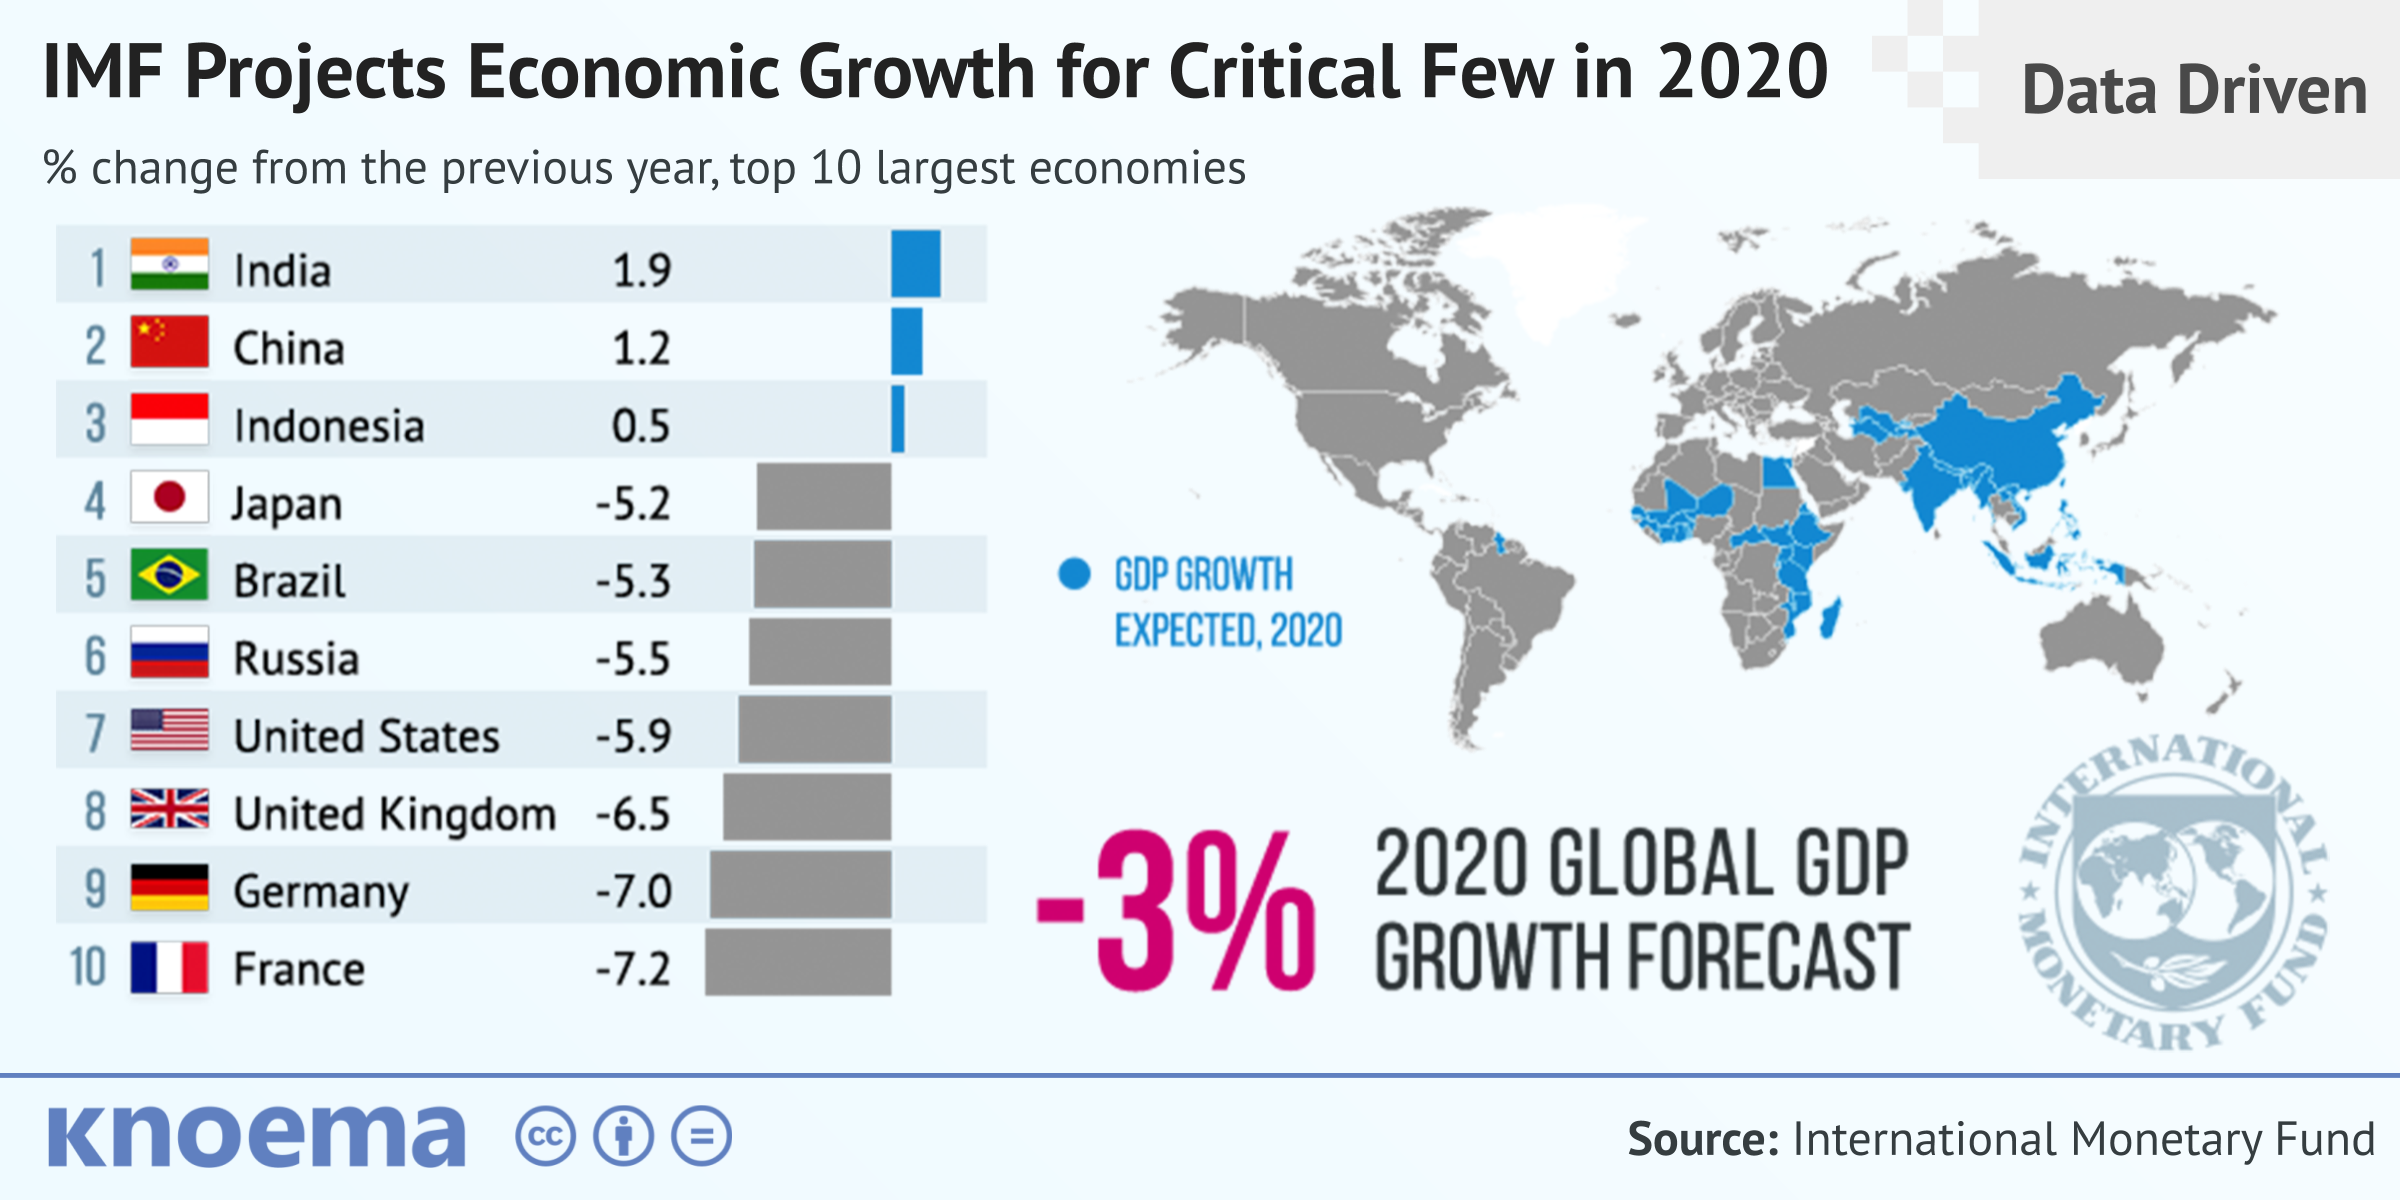 How Deep an Economic Decline Can the World Expect in 2020?